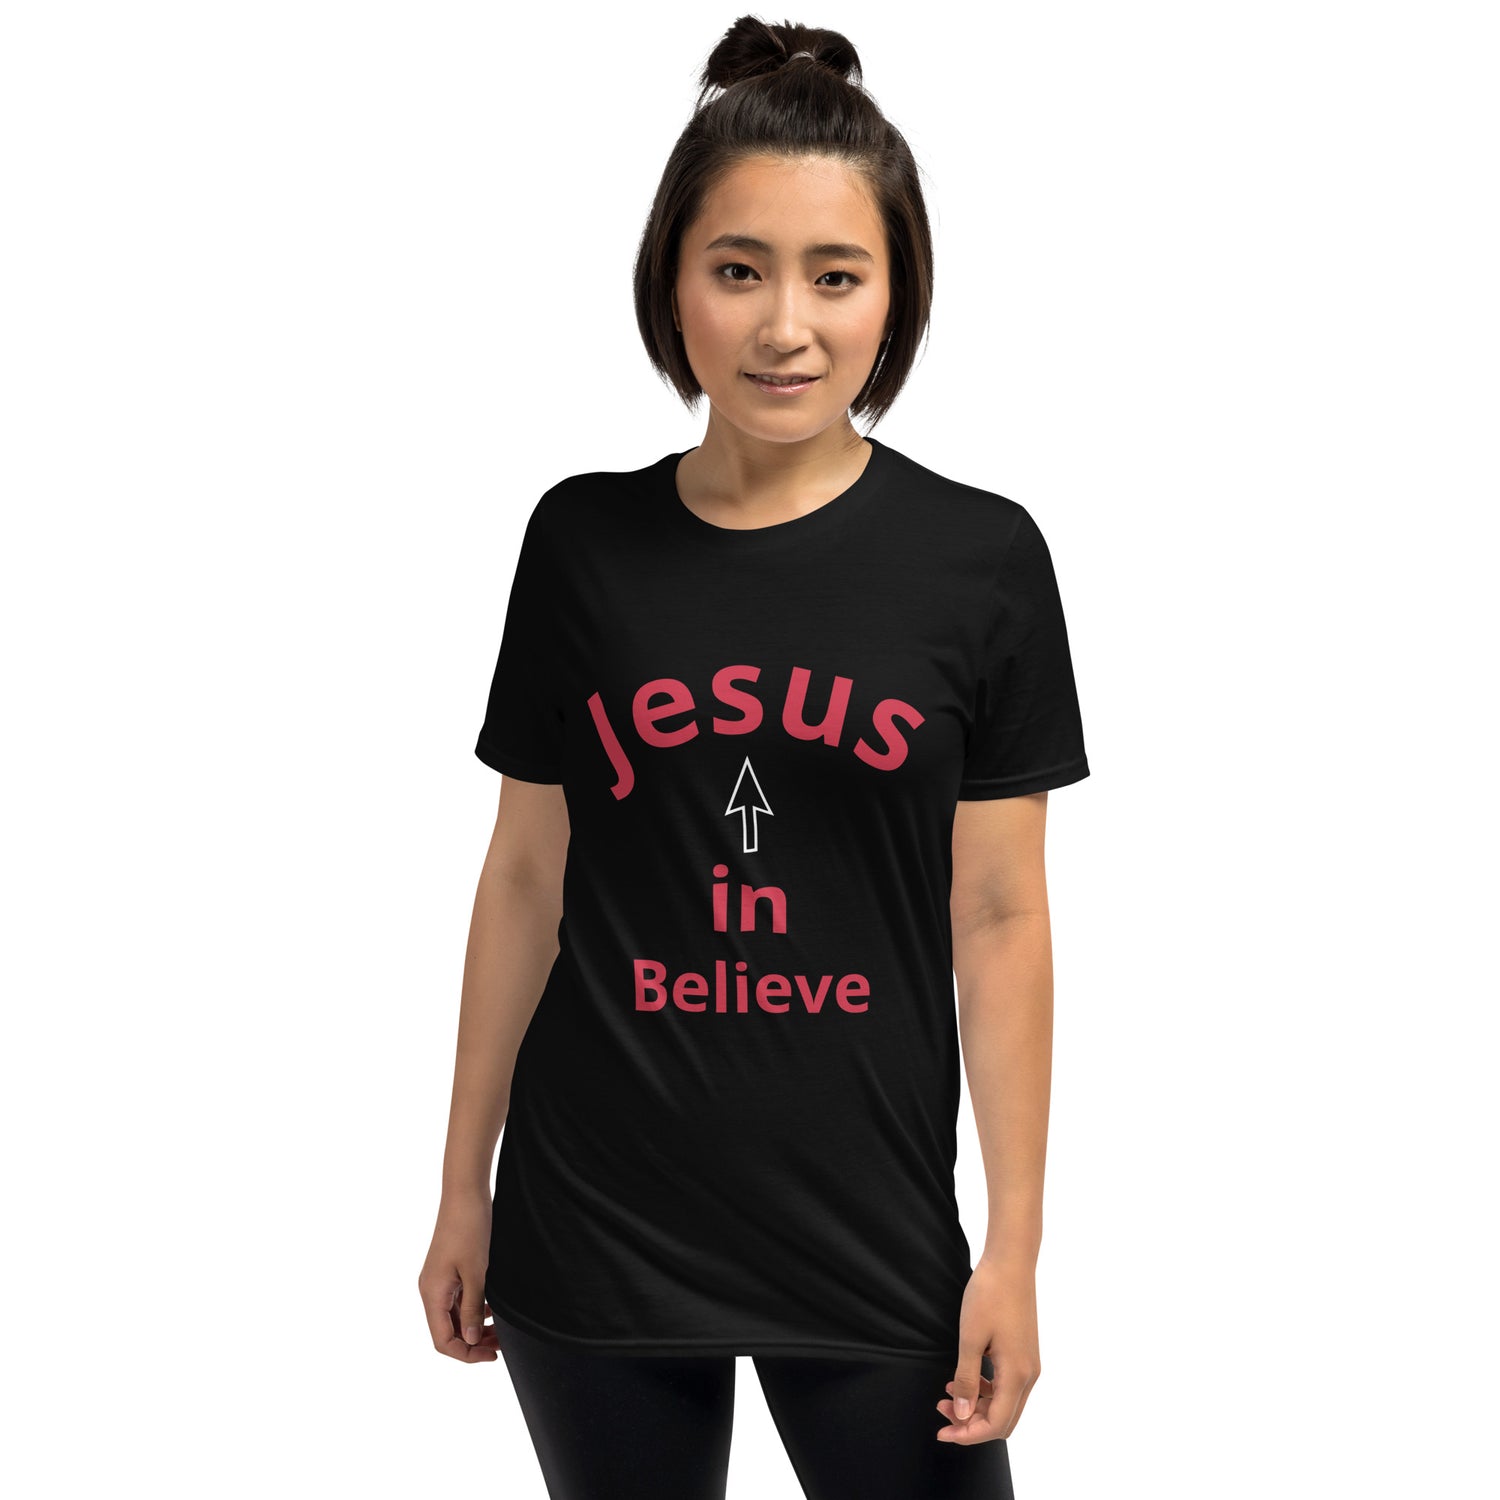 Unisex Soft-style Black T-shirt with Believe ib Jesus in Red letters and a White arrow